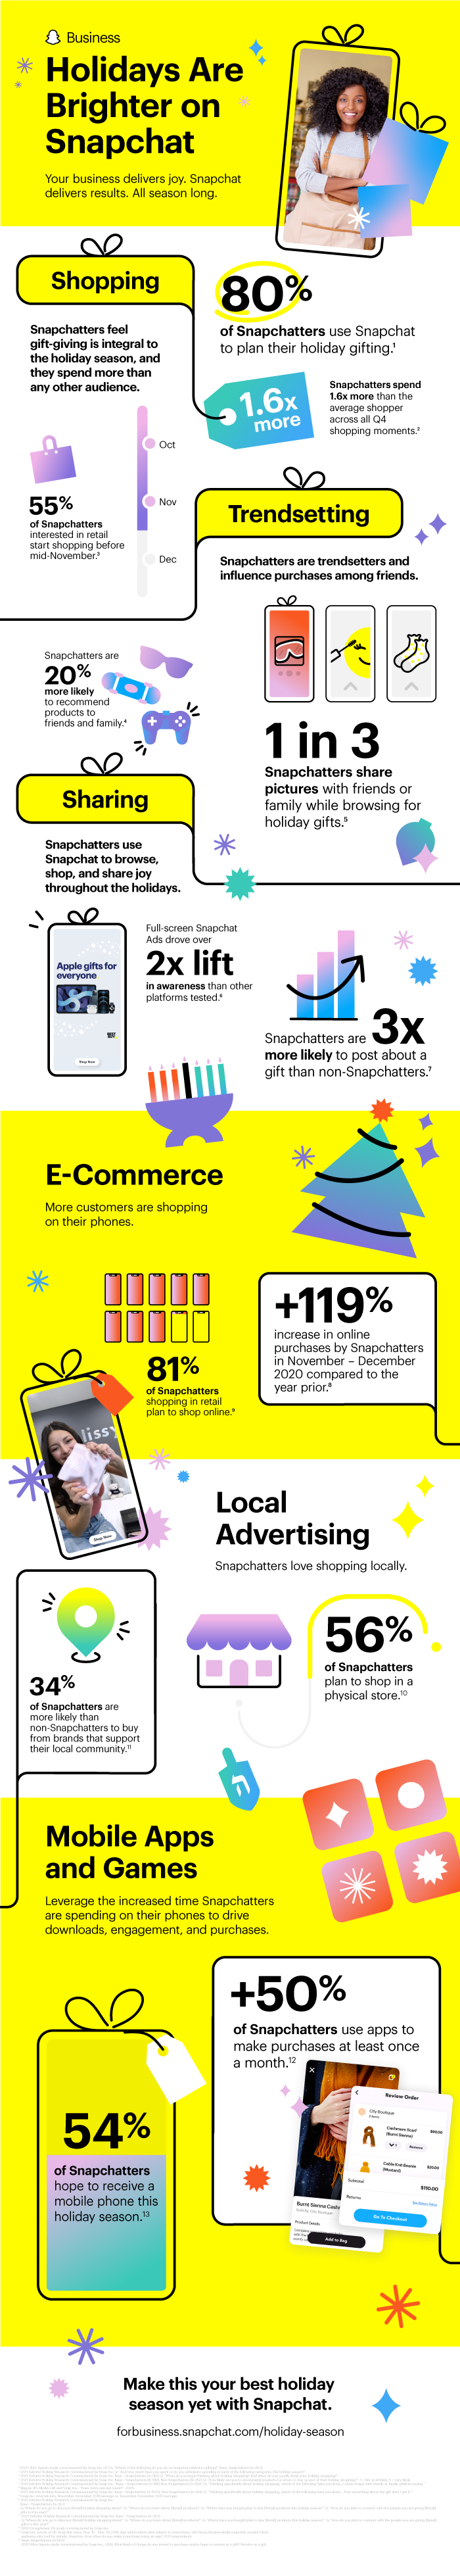 why snapchatters are your key audience this holiday season